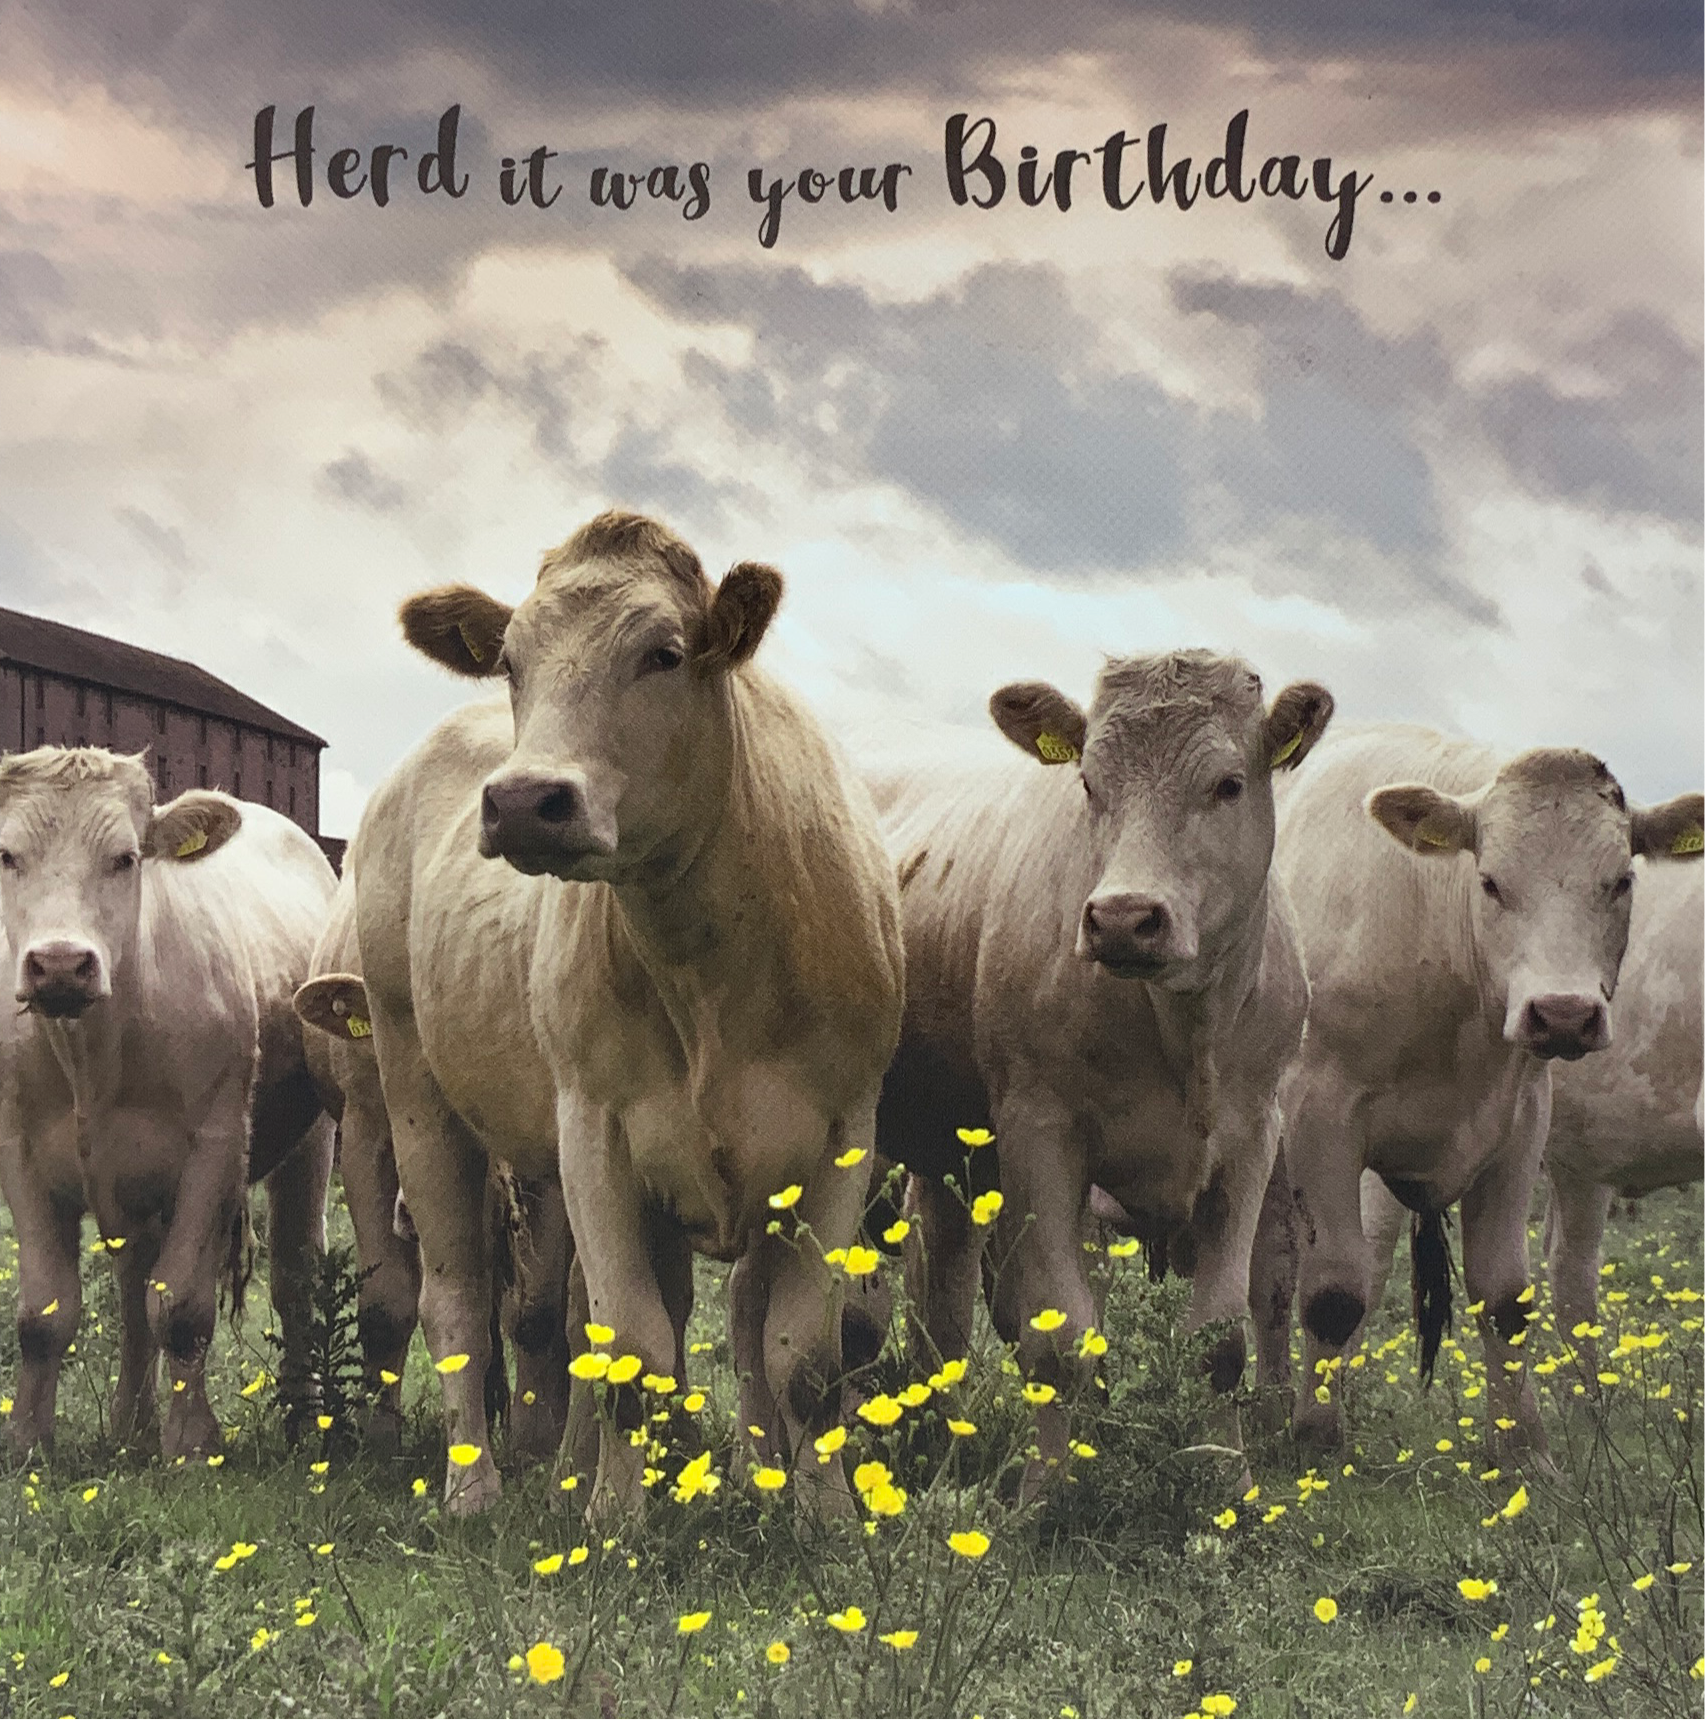 Belated Birthday Card - Herd It Was Your Birthday